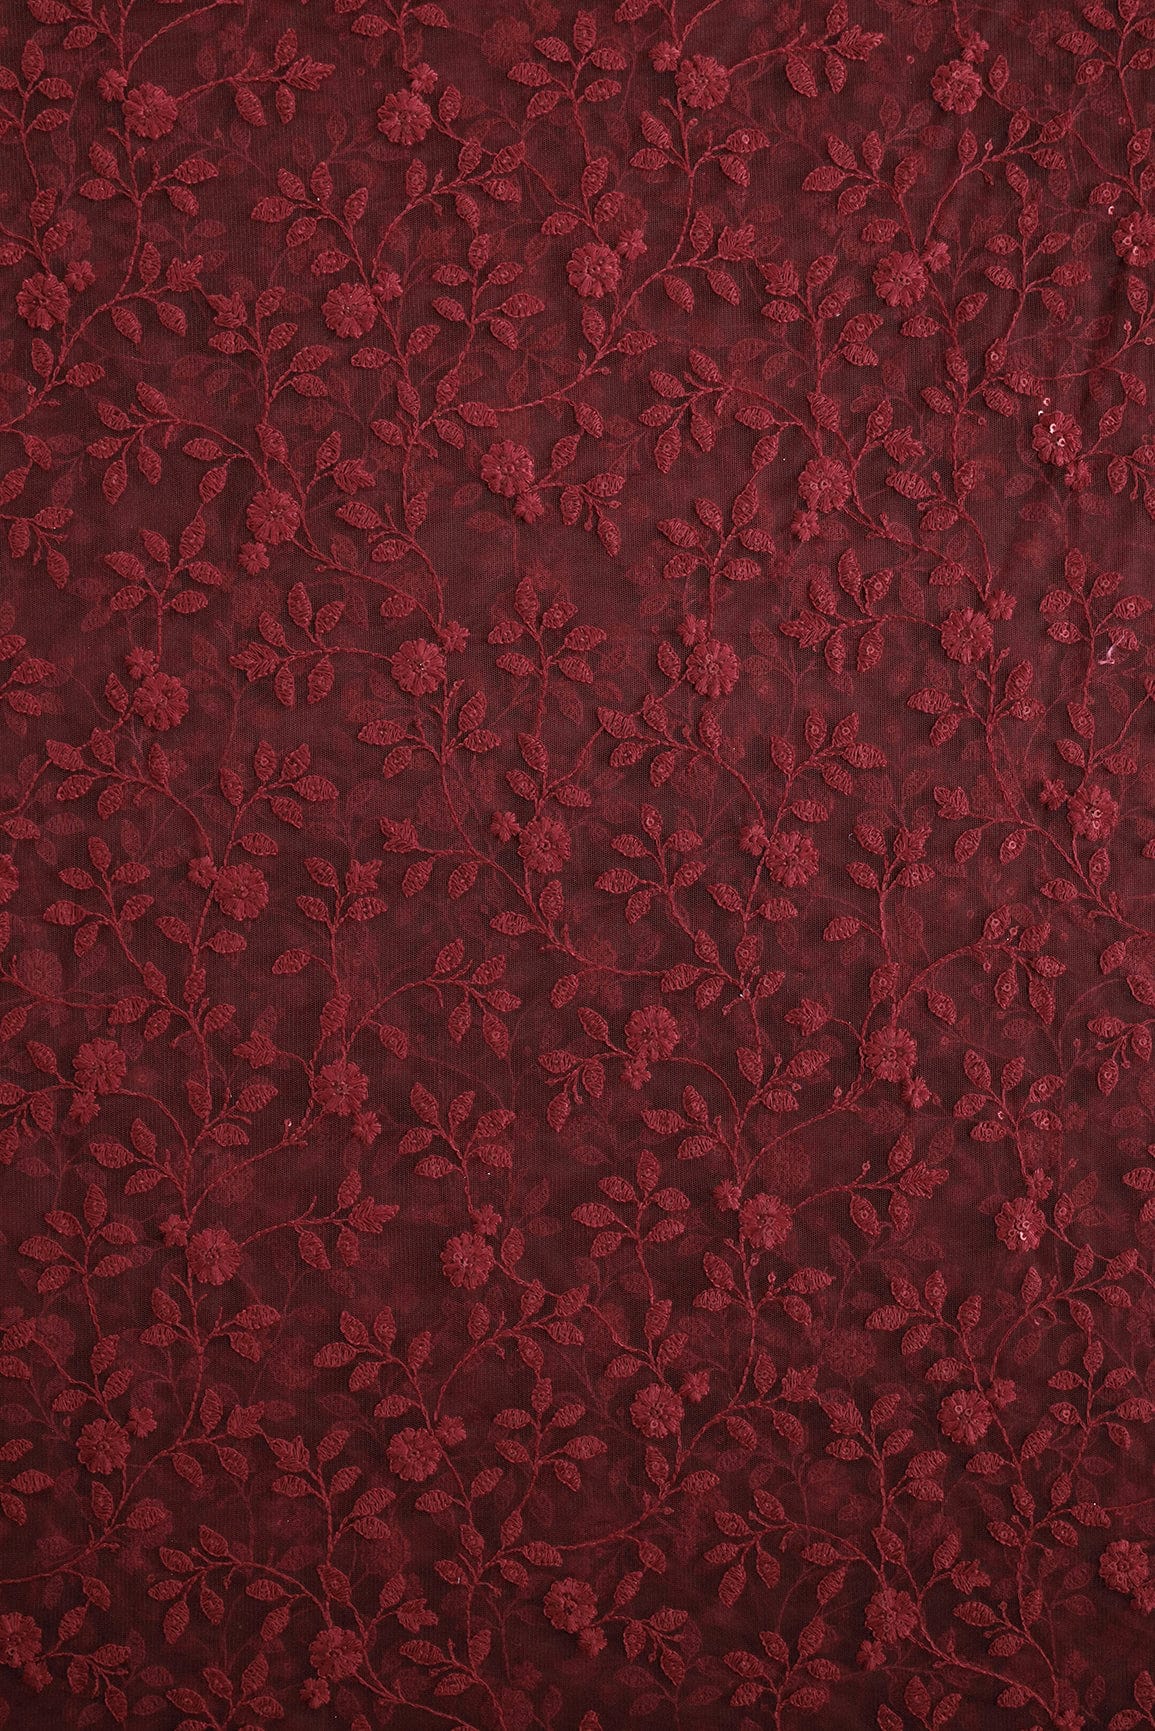 doeraa Embroidery Fabrics Maroon Thread And Sequins Floral Heavy Embroidery Work On Maroon Soft Net Fabric